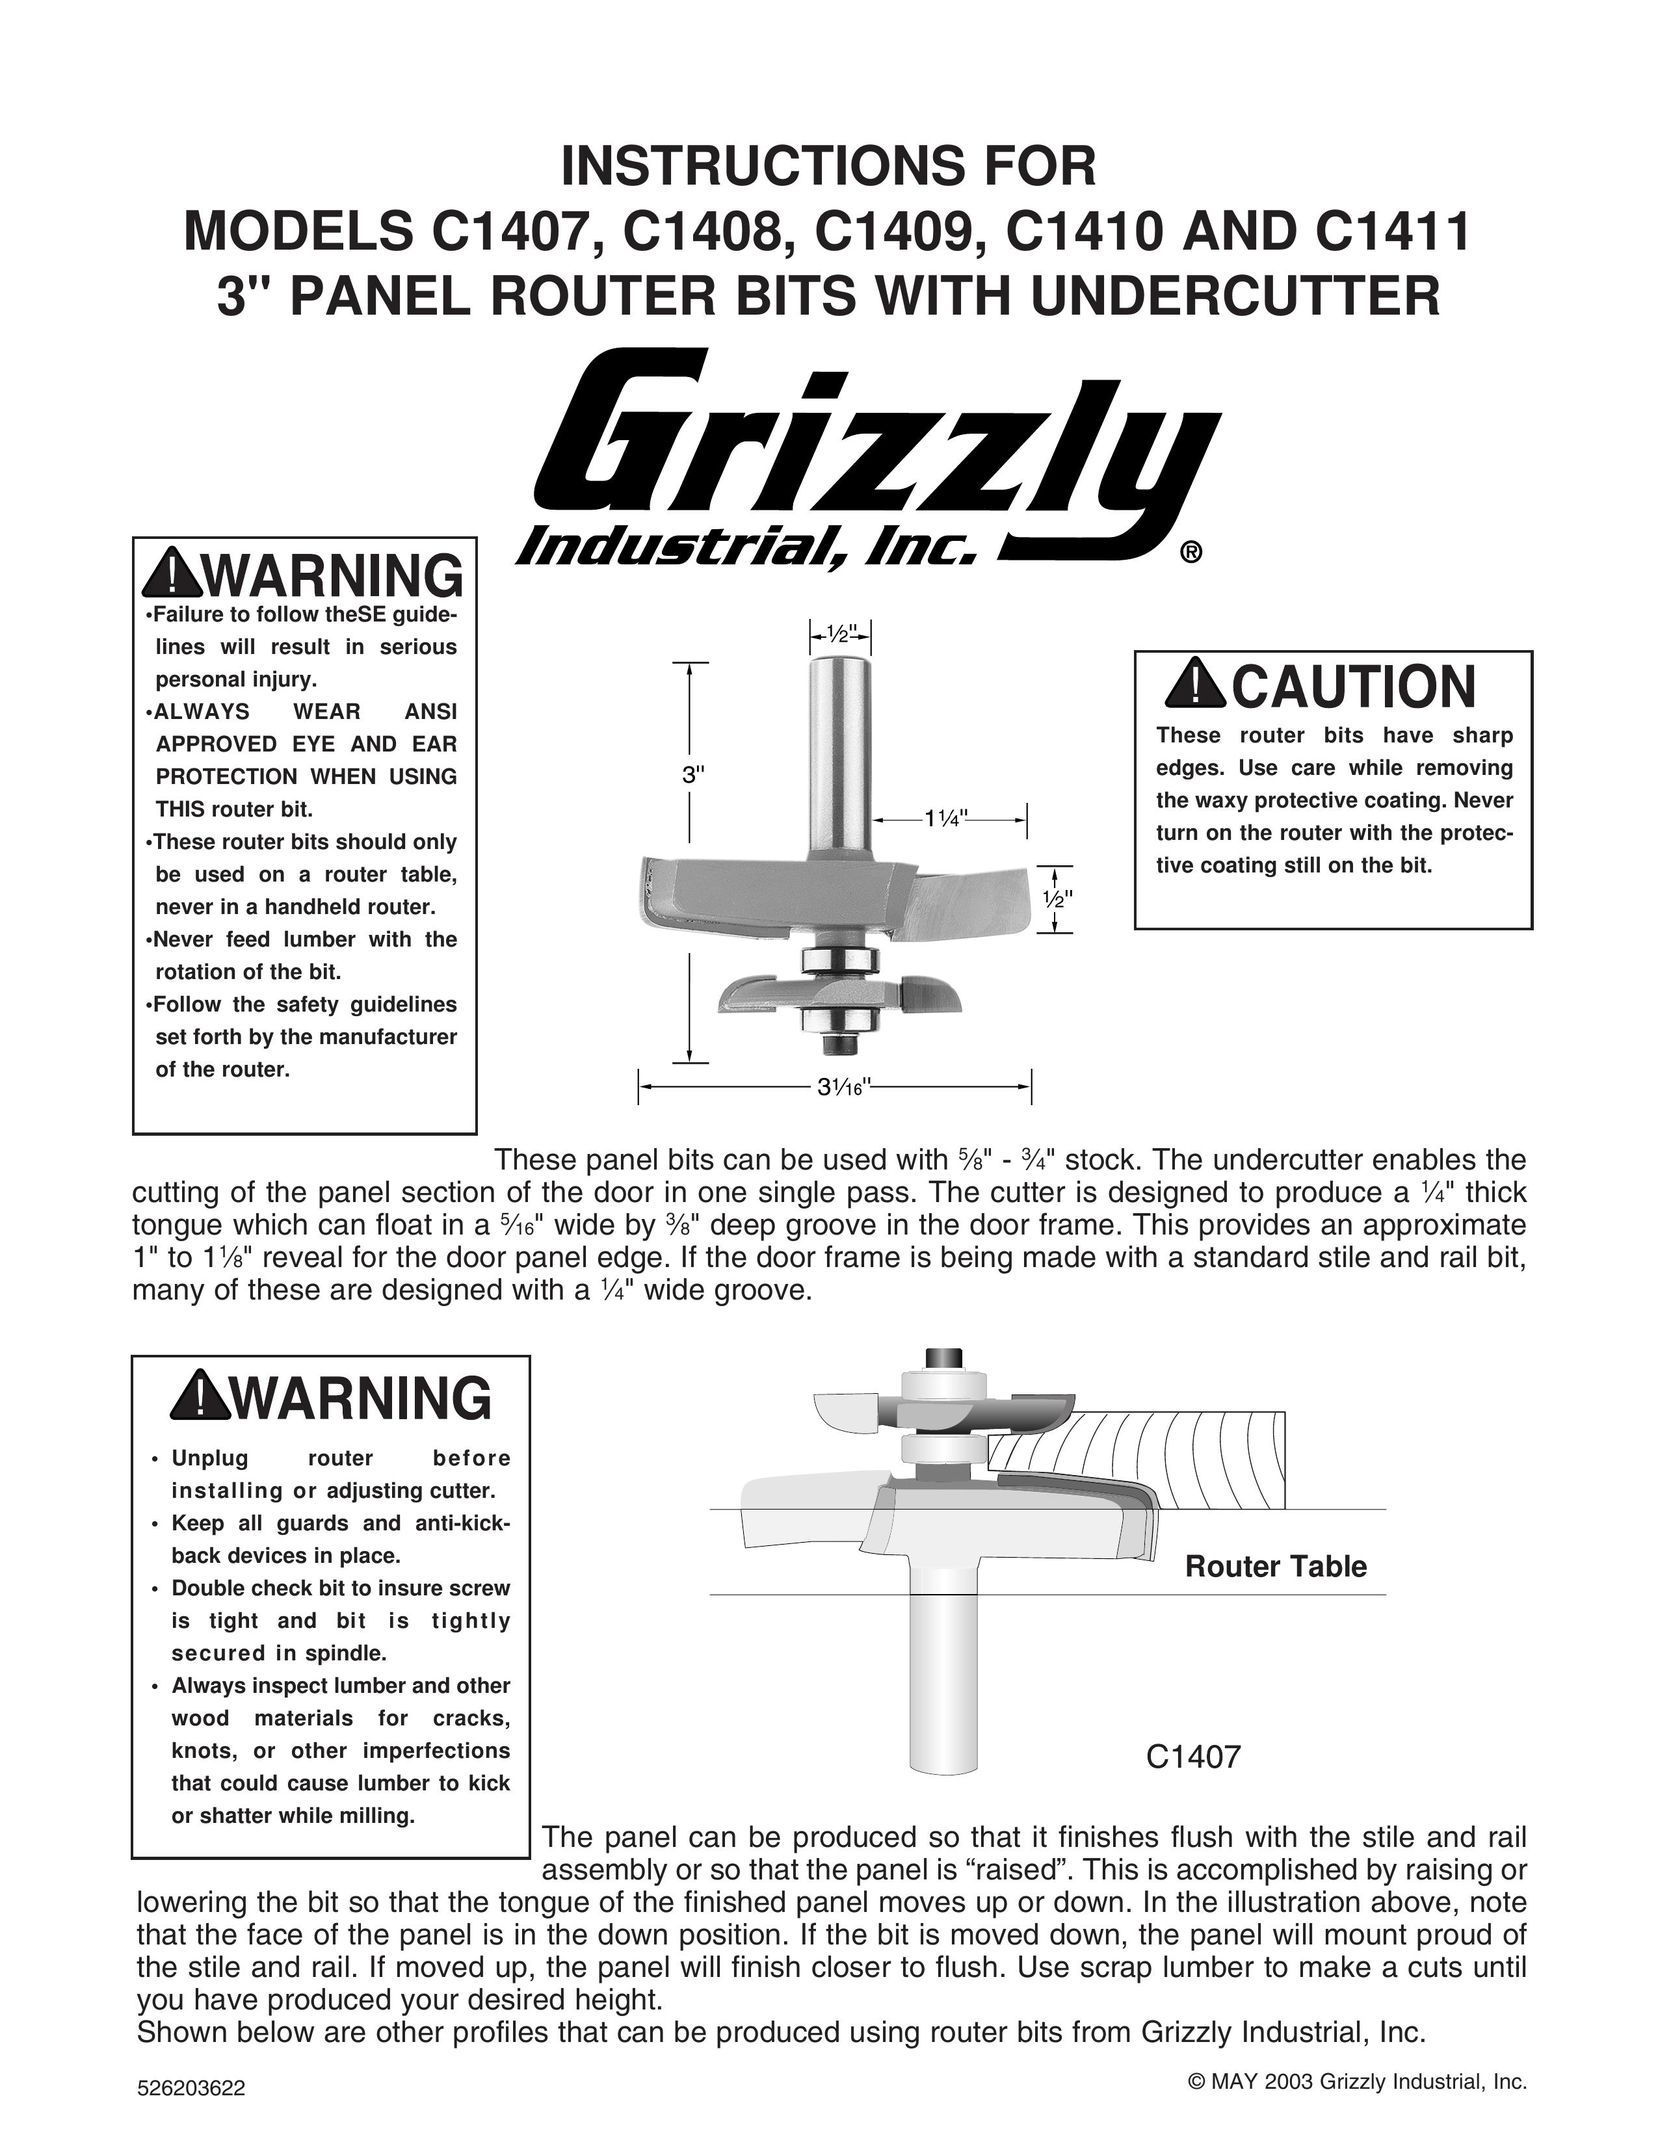 Grizzly C1407 Appliance Trim Kit User Manual